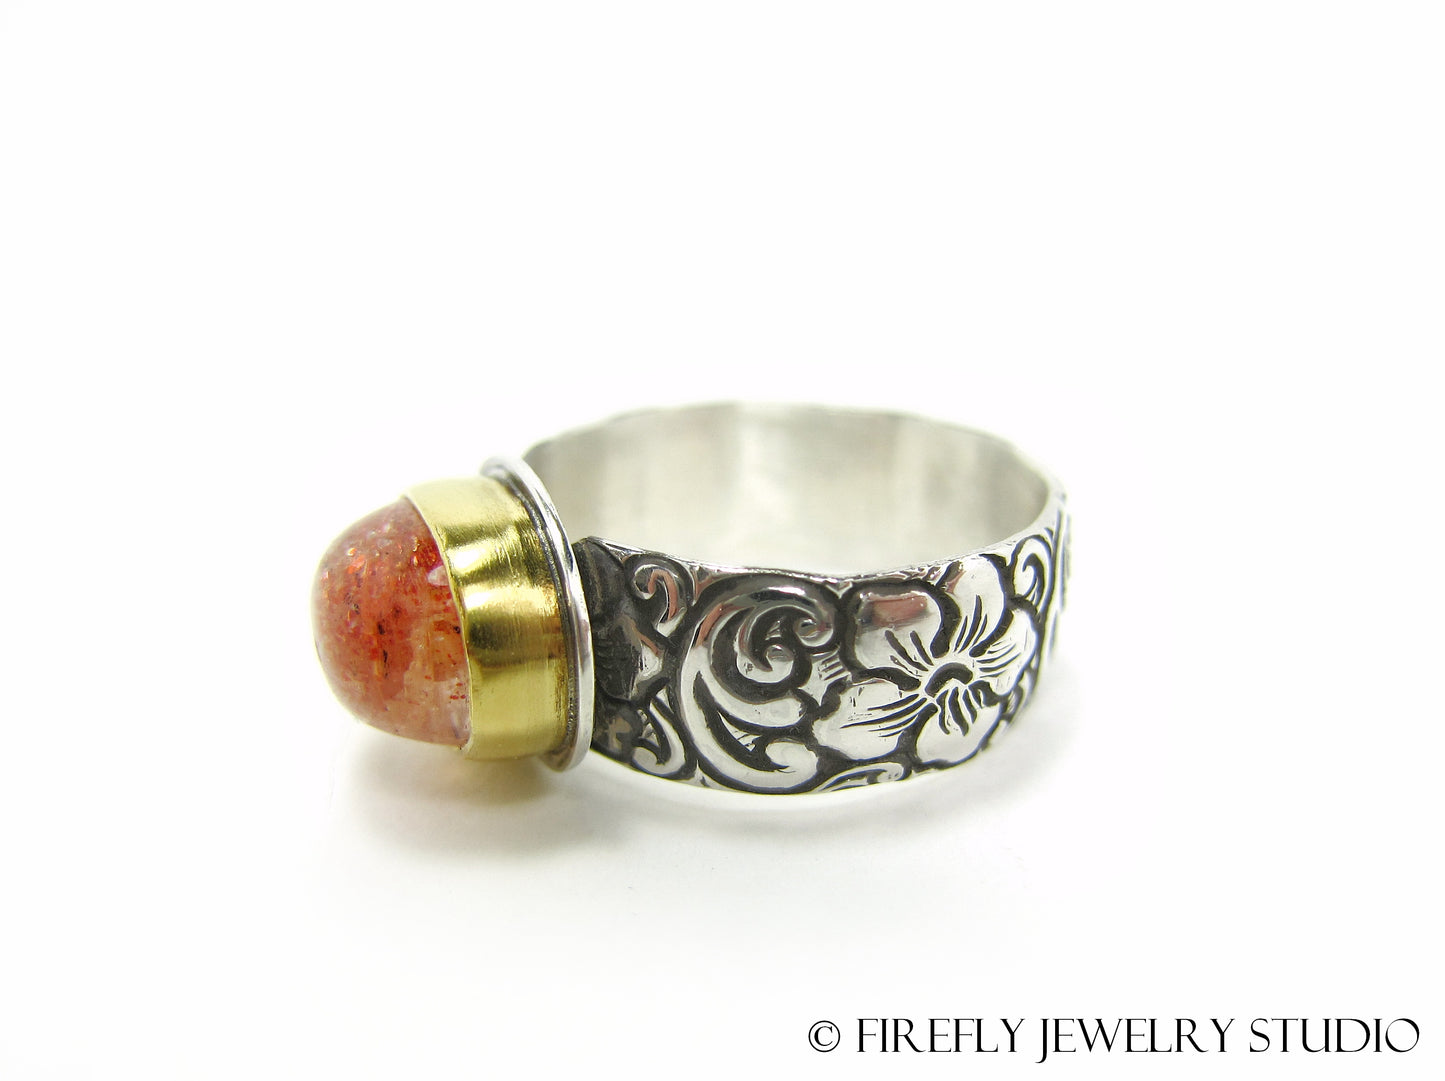 Confetti Sunstone Ring in 24k Gold and Sterling Silver. Size 6.75 - Firefly Jewelry Studio